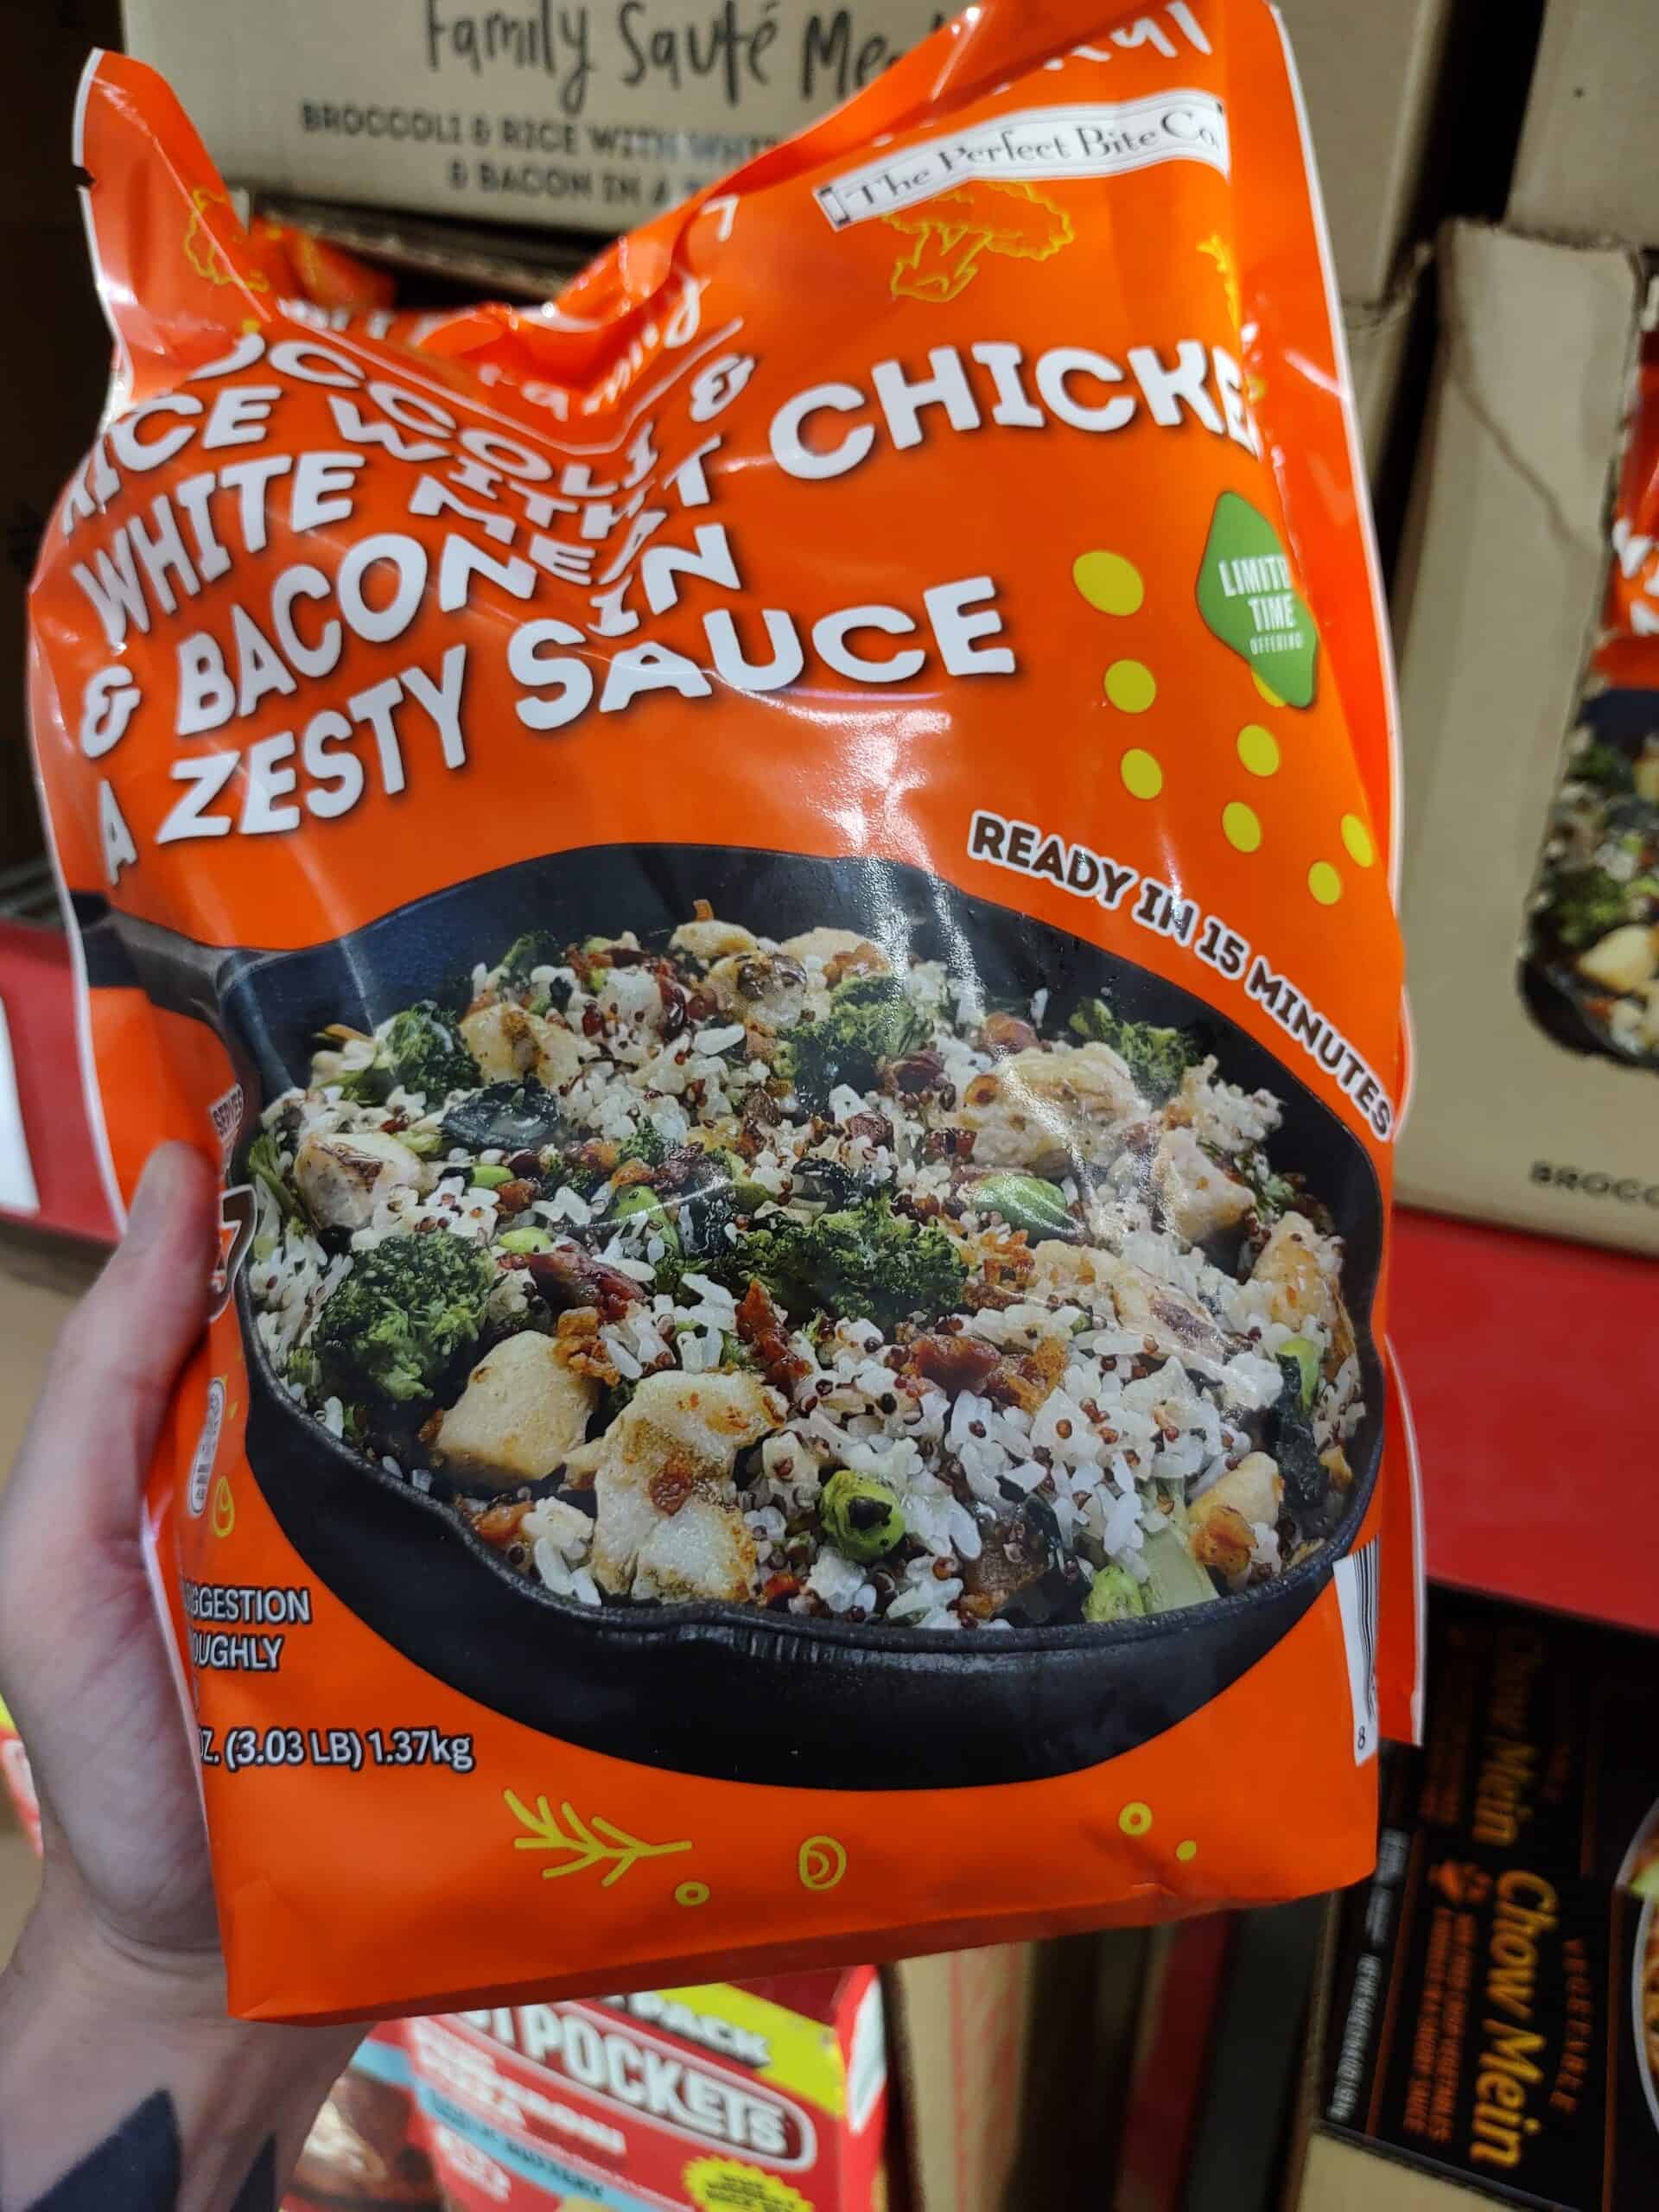 Broccoli & Rice with Chicken 48oz bag $6.88 at Sam’s